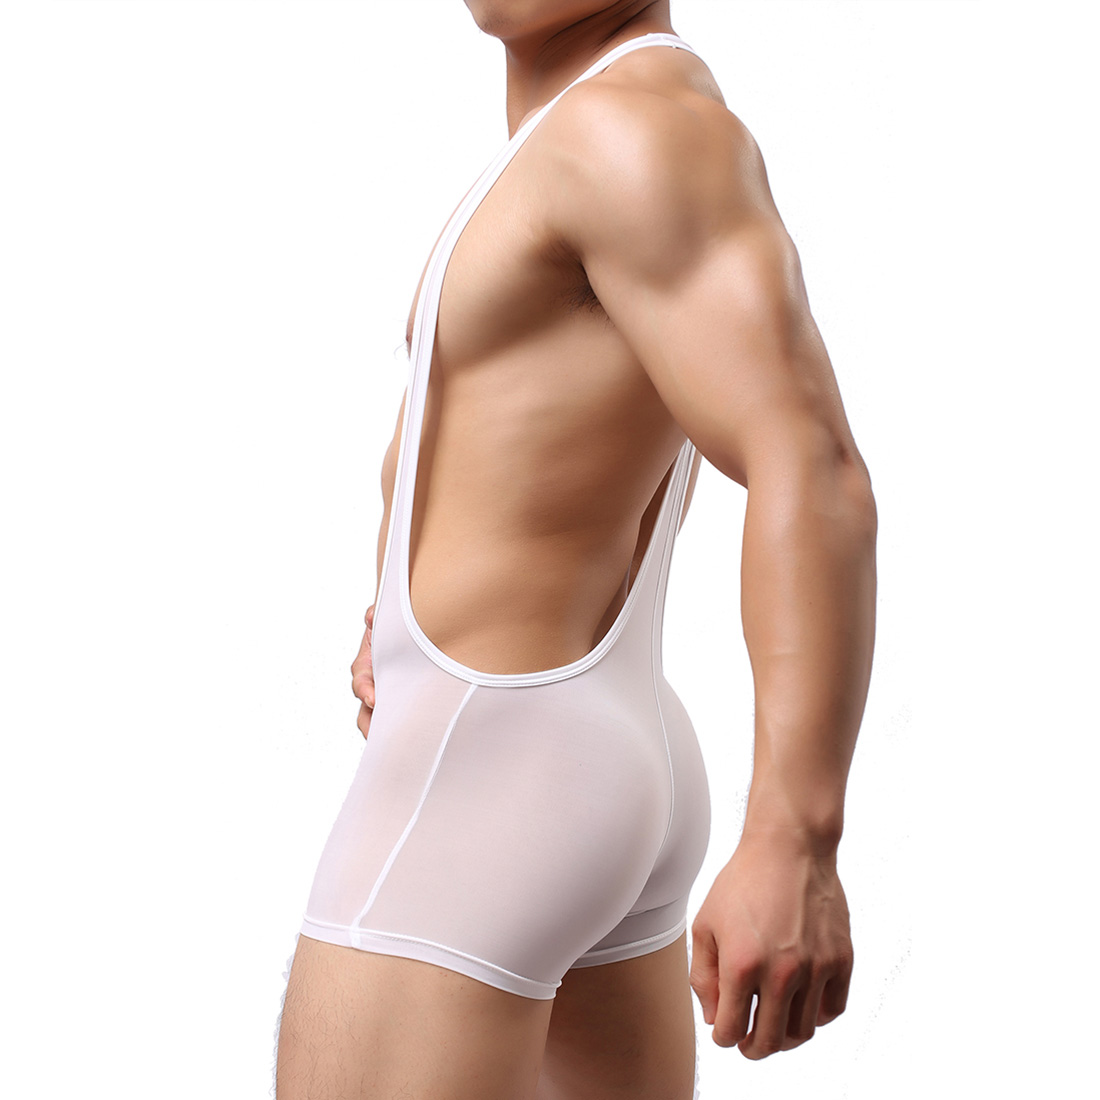 Men's Sexy Lingerie Underwear Sport Fitness One-pieces Swimsuit Wrestling Dress WH41 White M